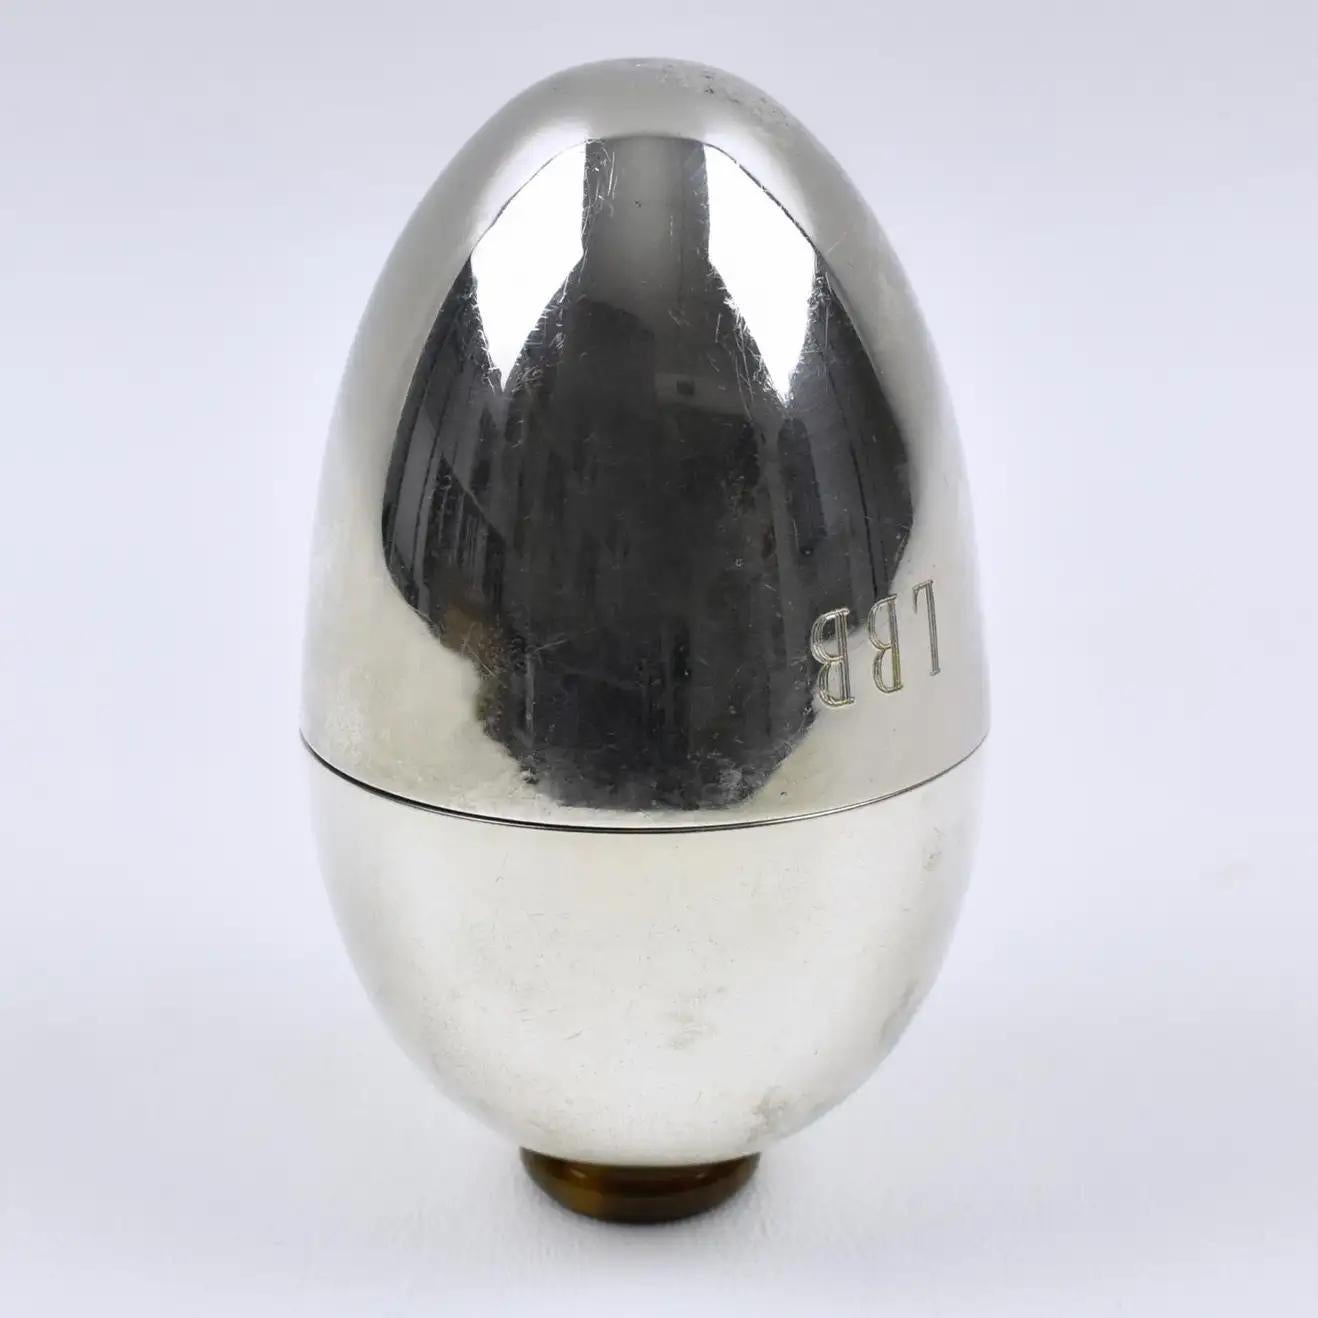 This exquisite 1970s silver plate sewing box was designed by Italian Gabriella Crespi (1922-2017). The streamlined egg-shaped opens in two with an almost complete interior insert. The monogram 